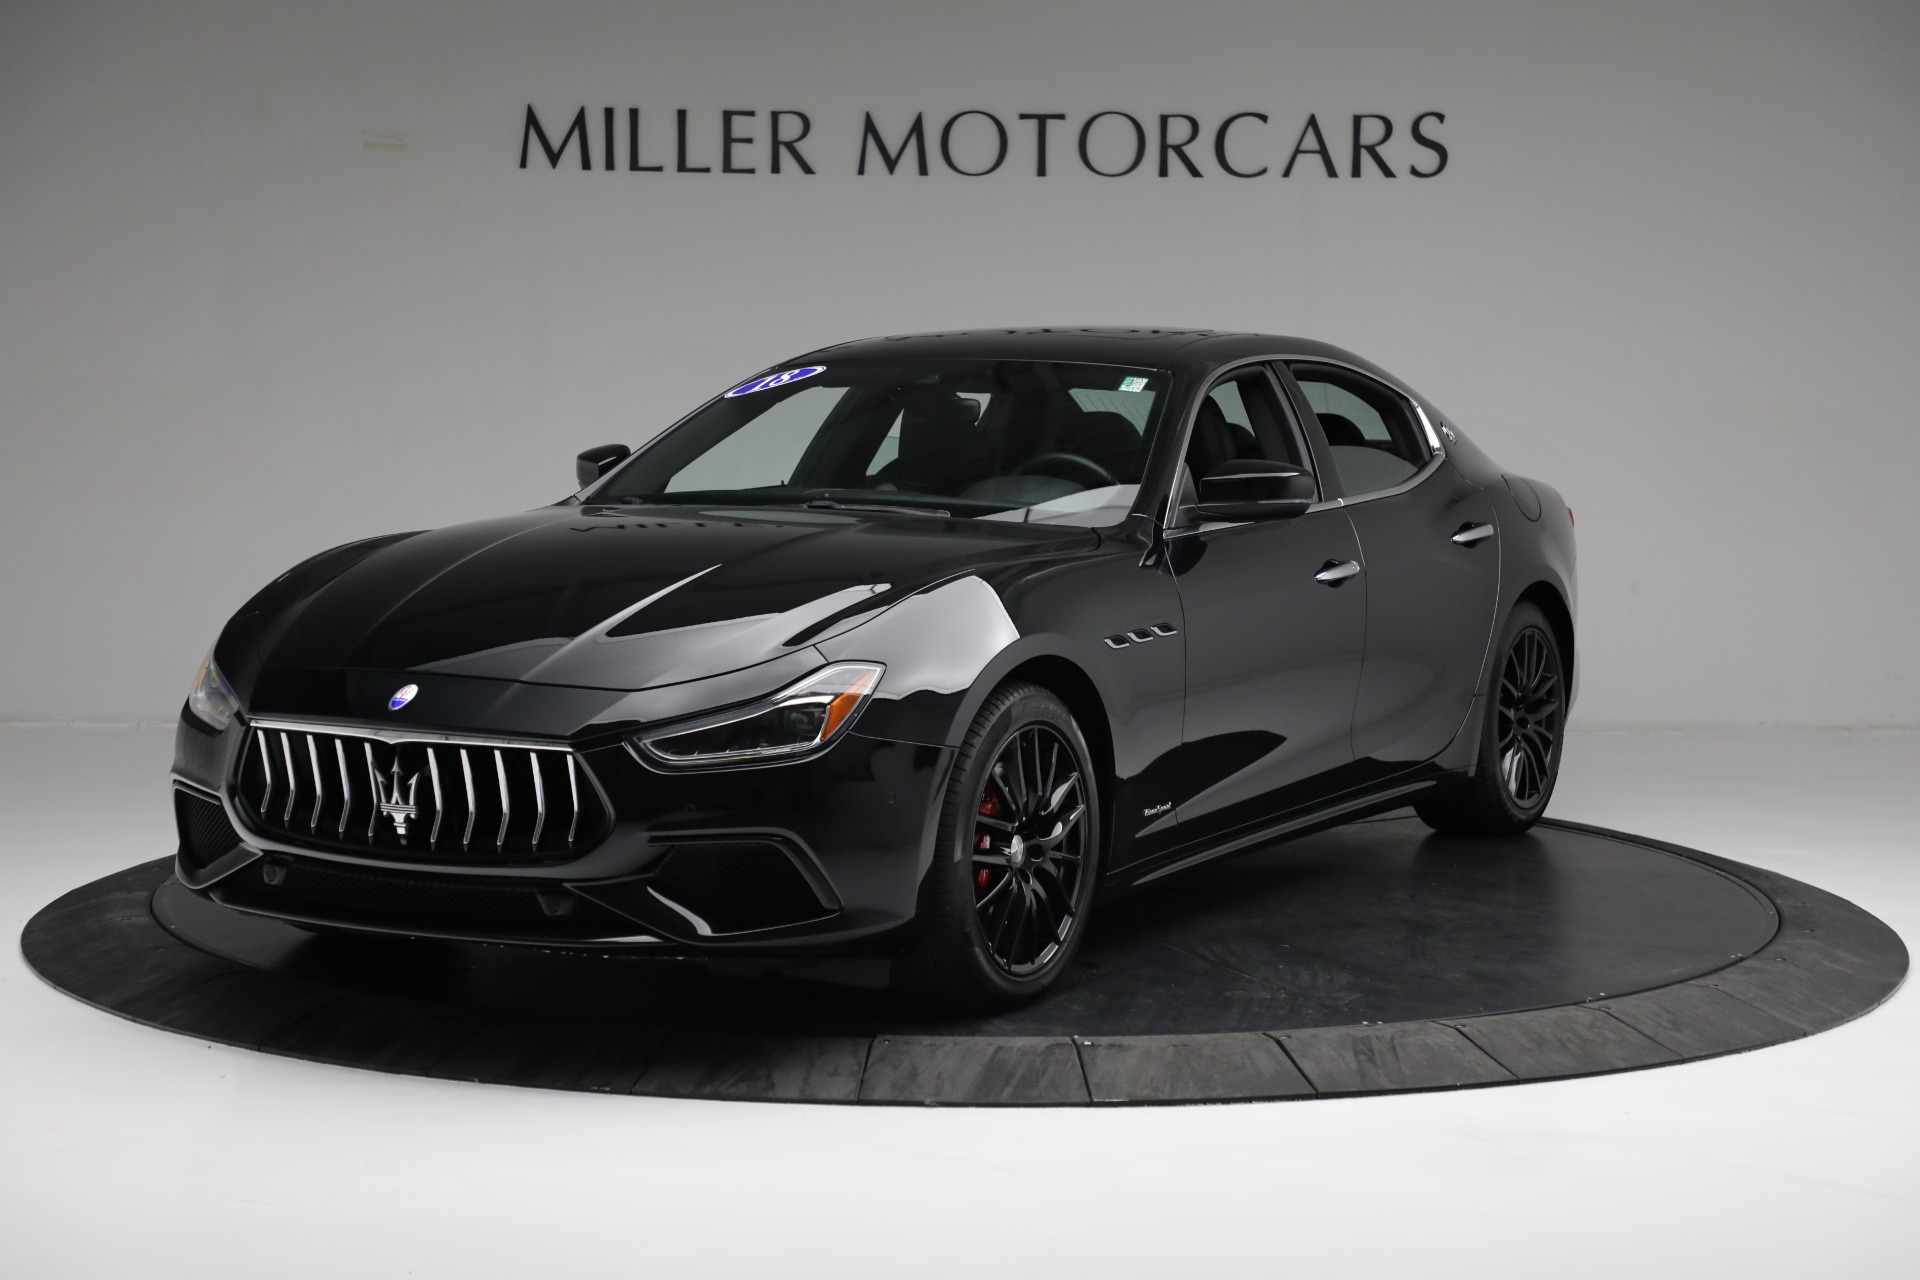 Used 2018 Maserati Ghibli S Q4 Gransport for sale $58,900 at Aston Martin of Greenwich in Greenwich CT 06830 1